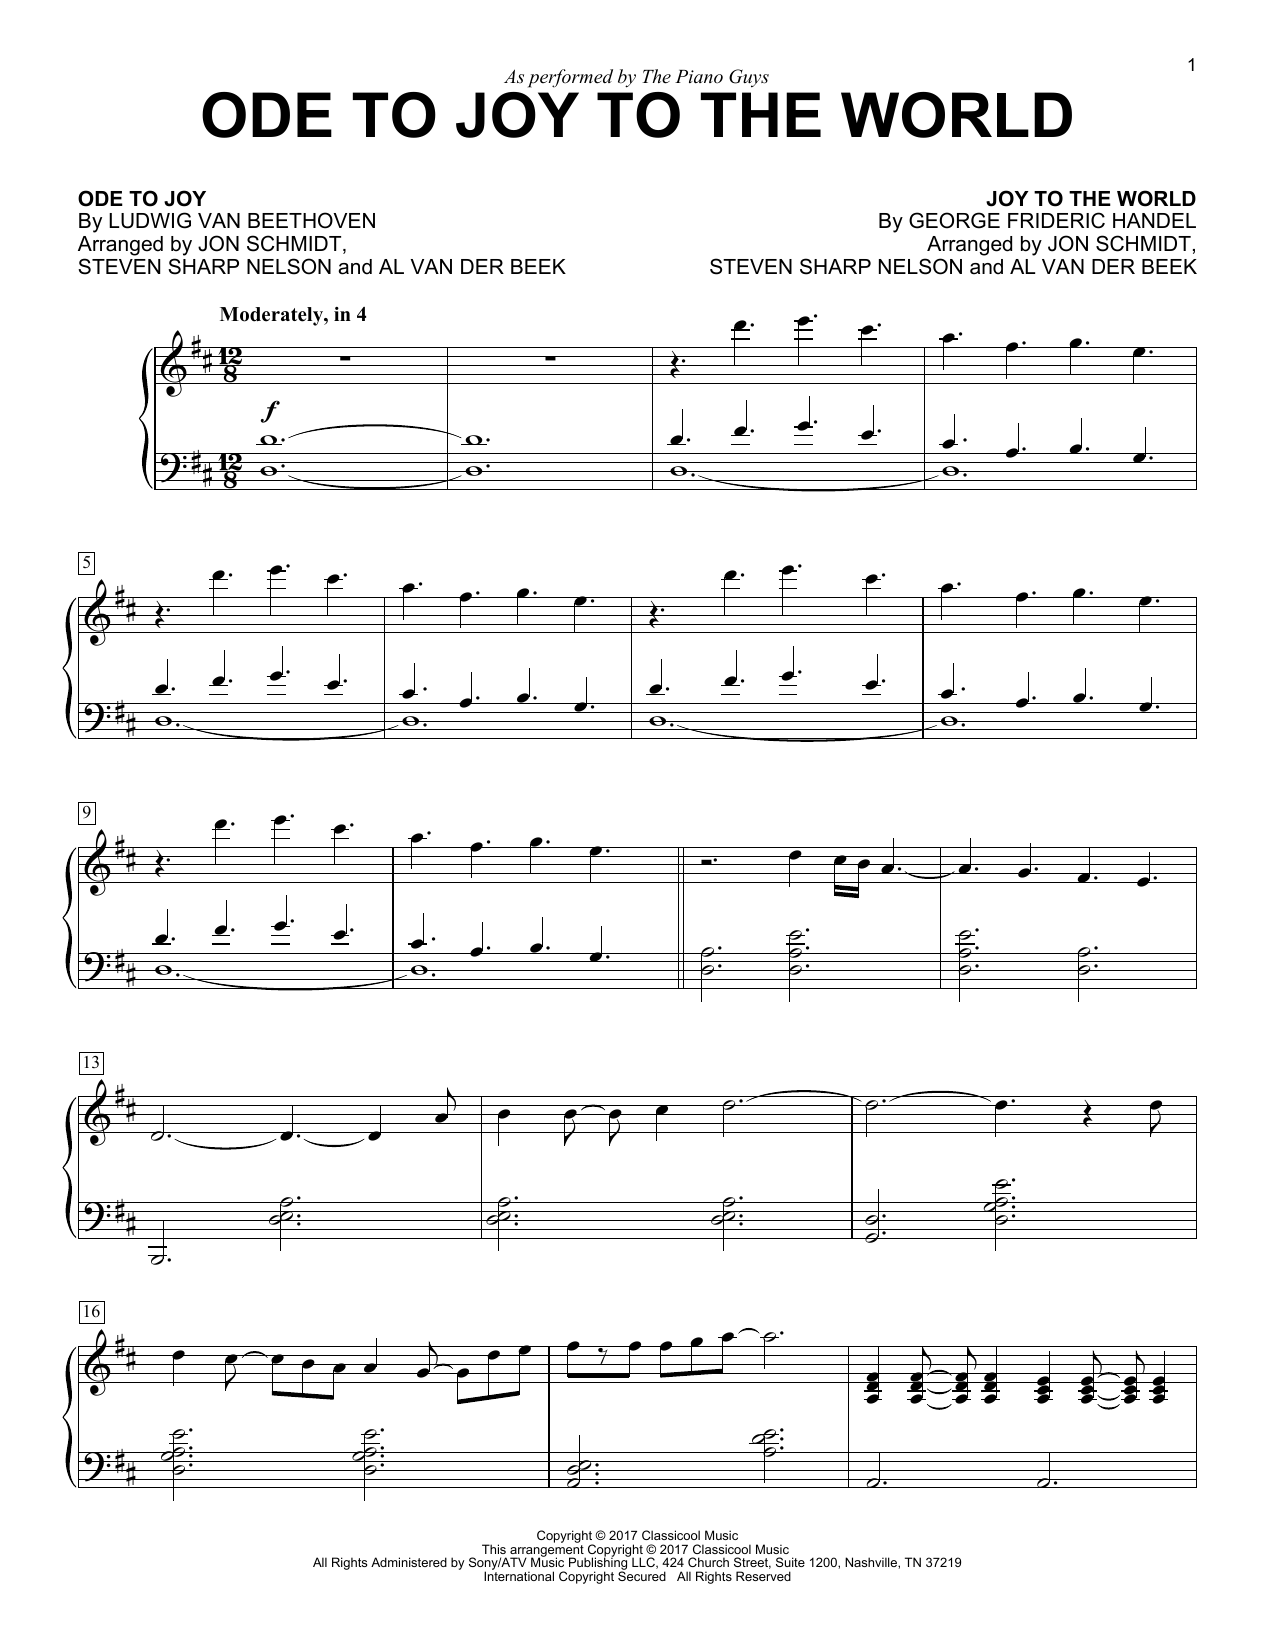 Ode To Joy to the World Christmas sheet music, notes and chords for Piano, ...